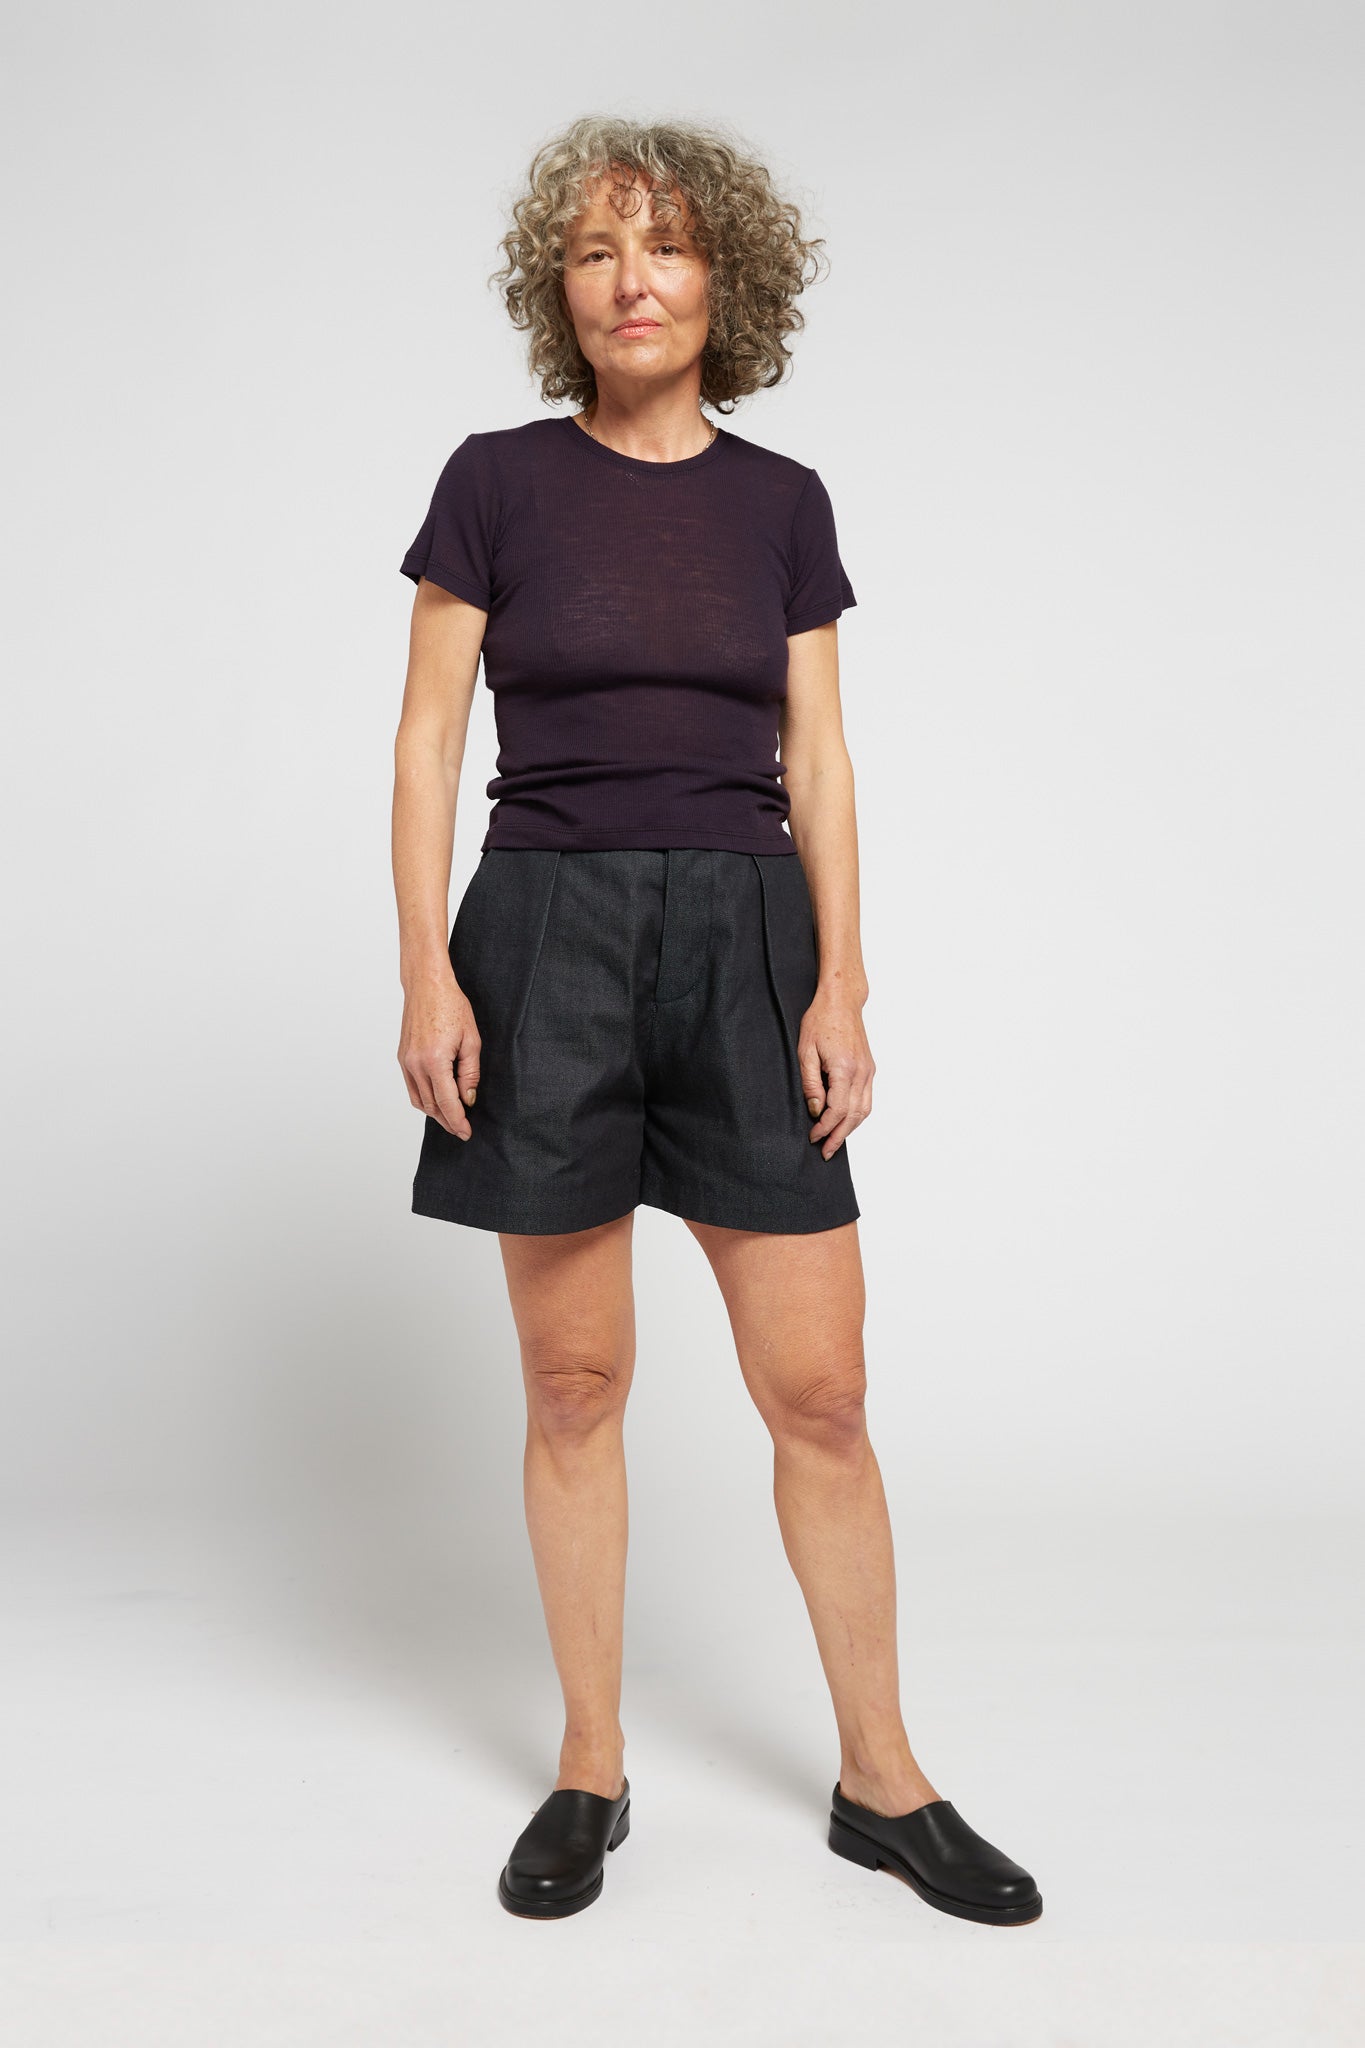 A.BCH A.34 Aubergine Short Sleeve Thermal in Merino Wool